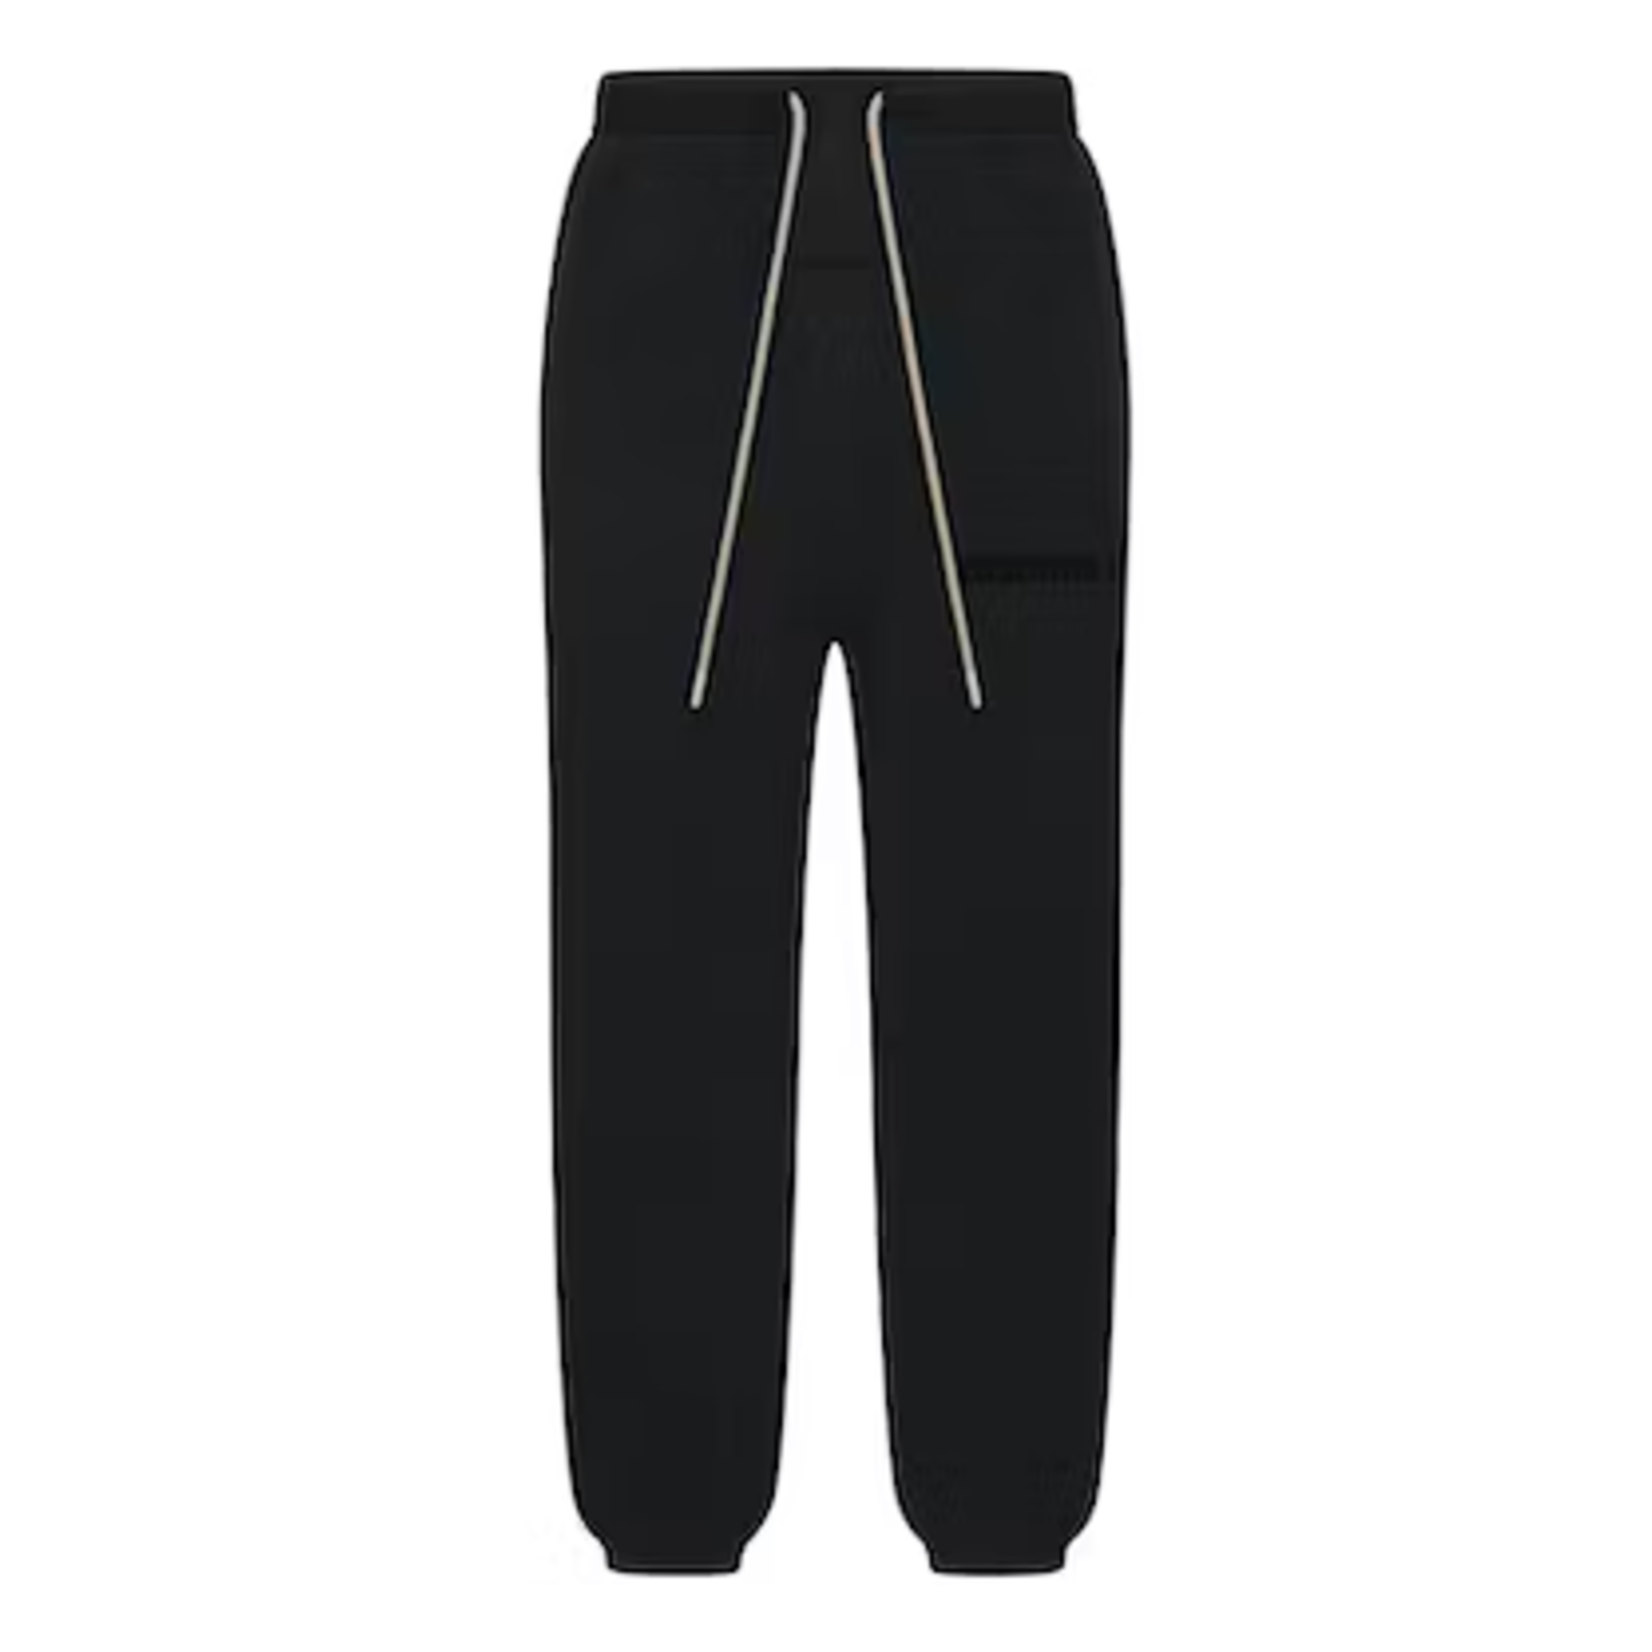 Fear Fear Of God Essentials Sweatpant Jet Black Size Large, DS BRAND NEW